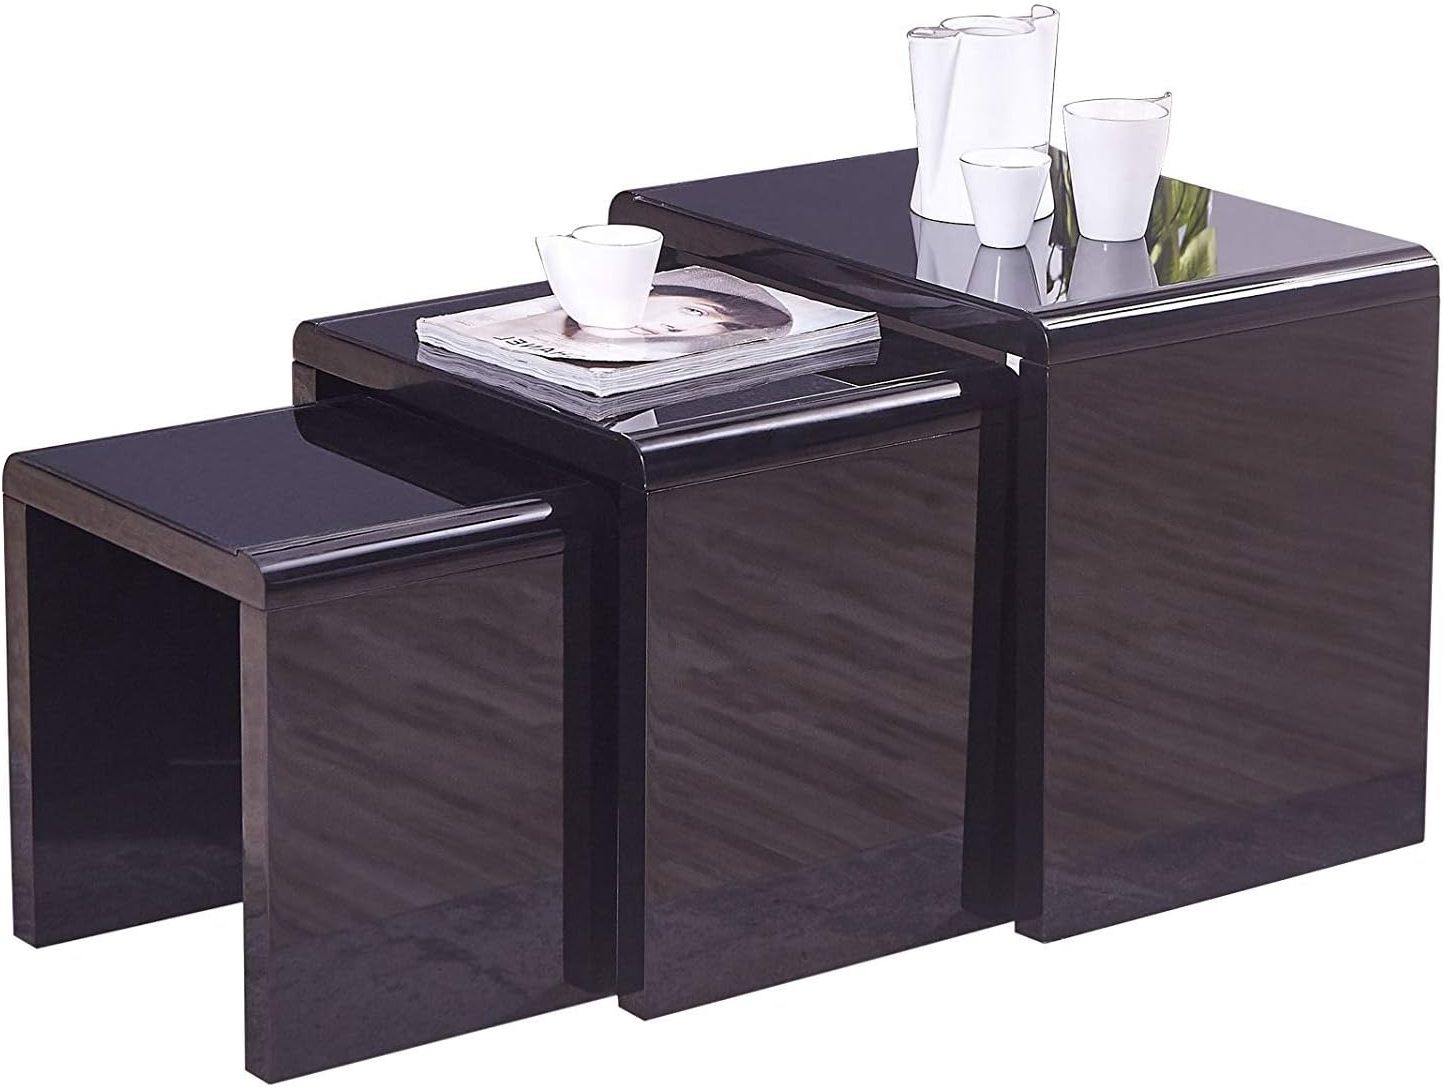 Trendy Mecor Nest Of 3 Tables High Gloss Nesting Tables Wood Coffee Table Pertaining To High Gloss Black Coffee Tables (View 15 of 15)